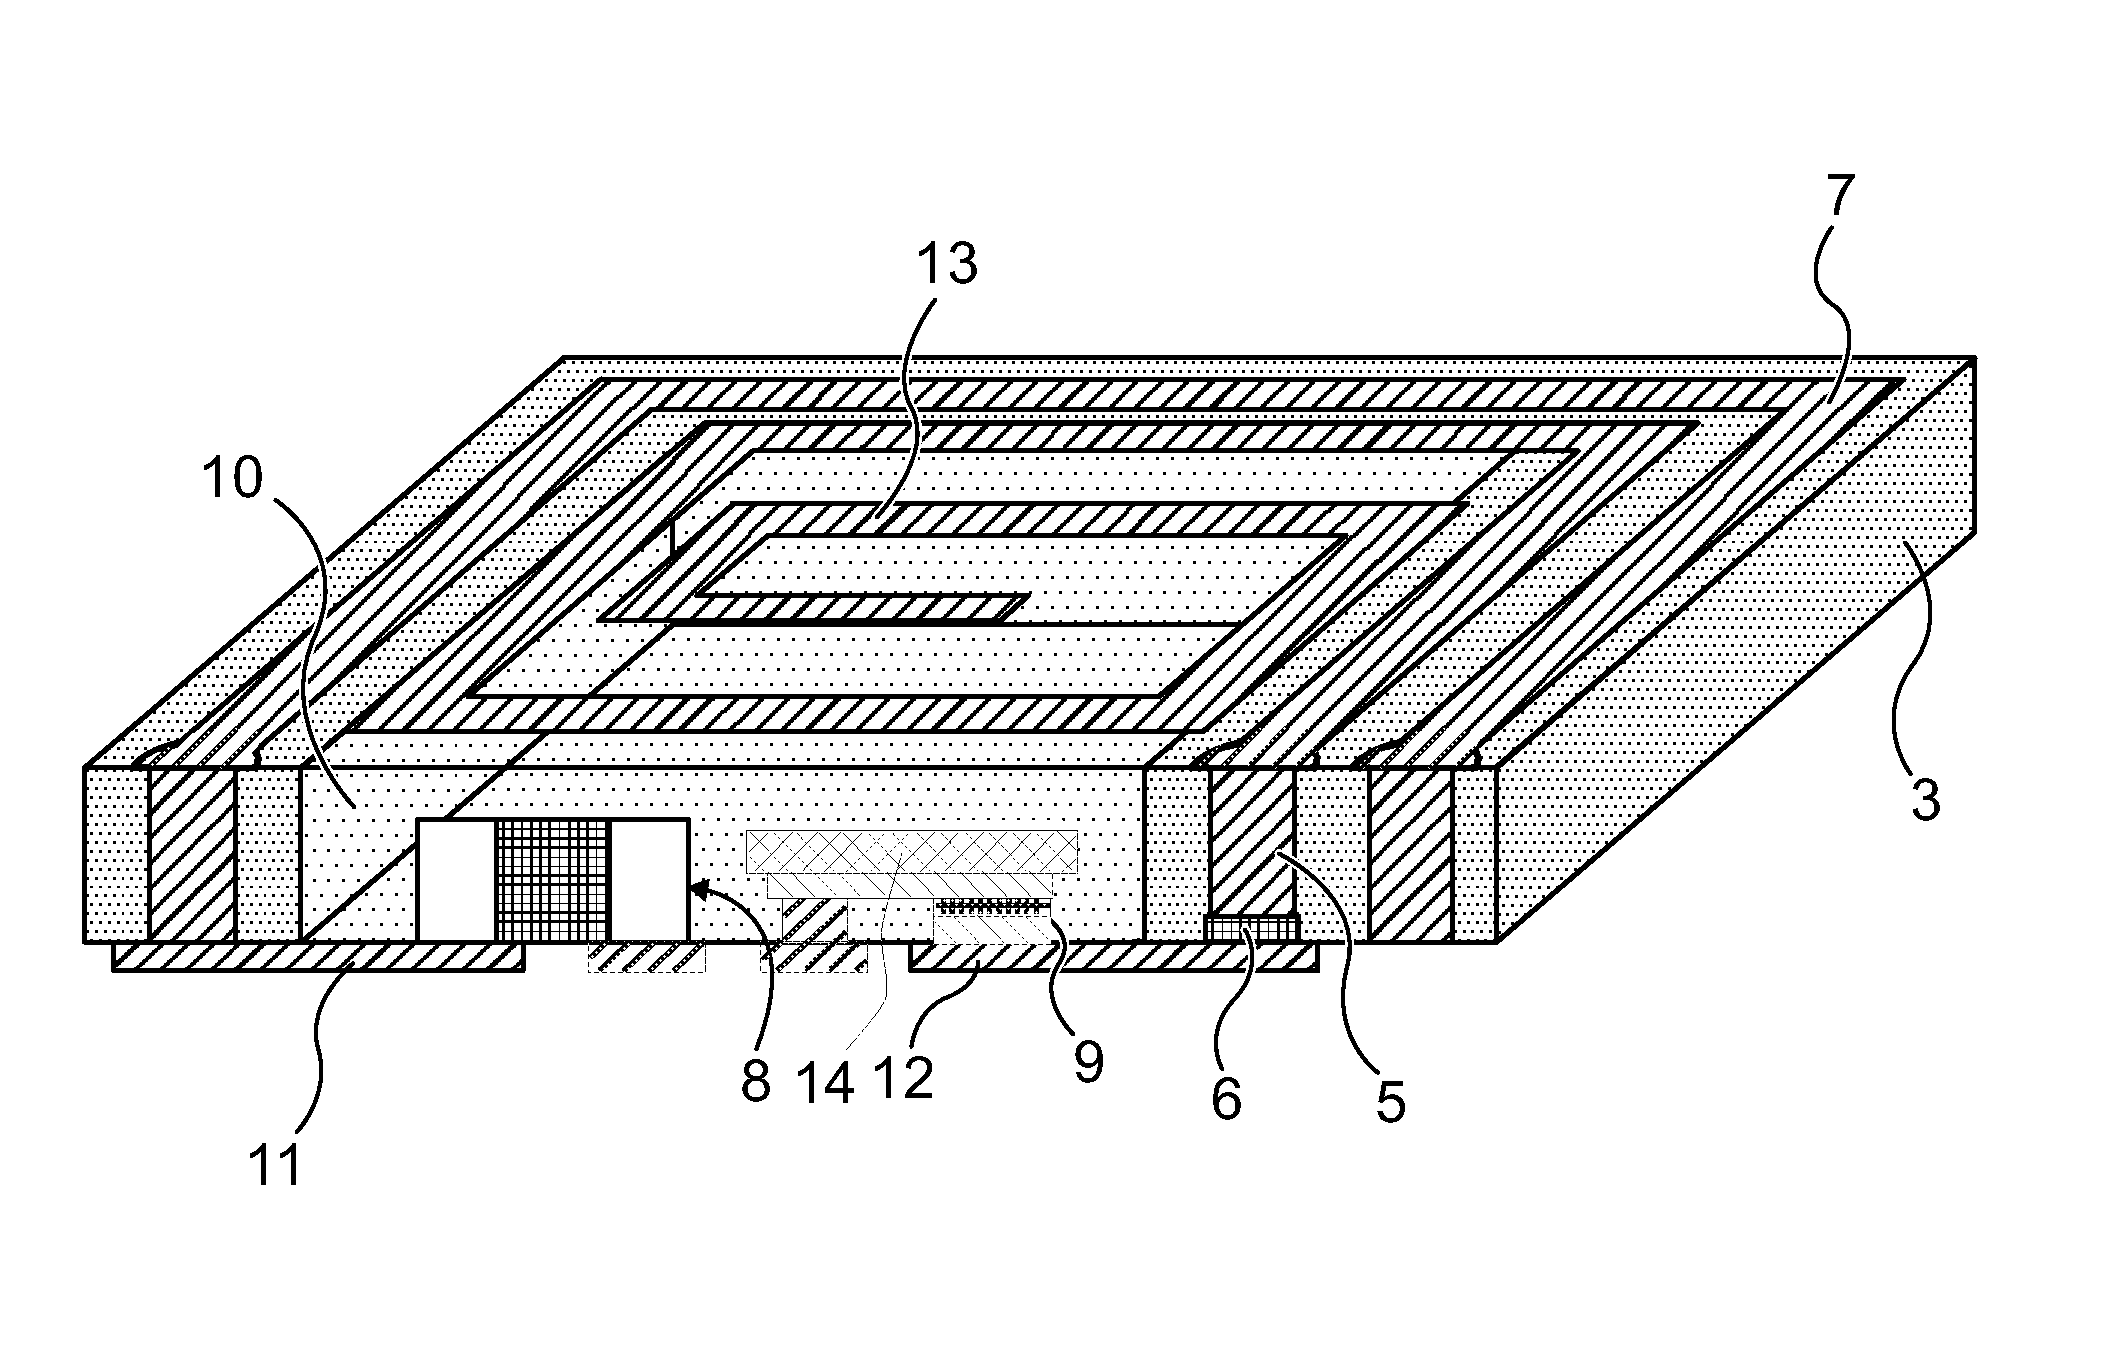 Polymer Frame for a Chip, Such That the Frame Comprises at Least One Via in Series with a Capacitor